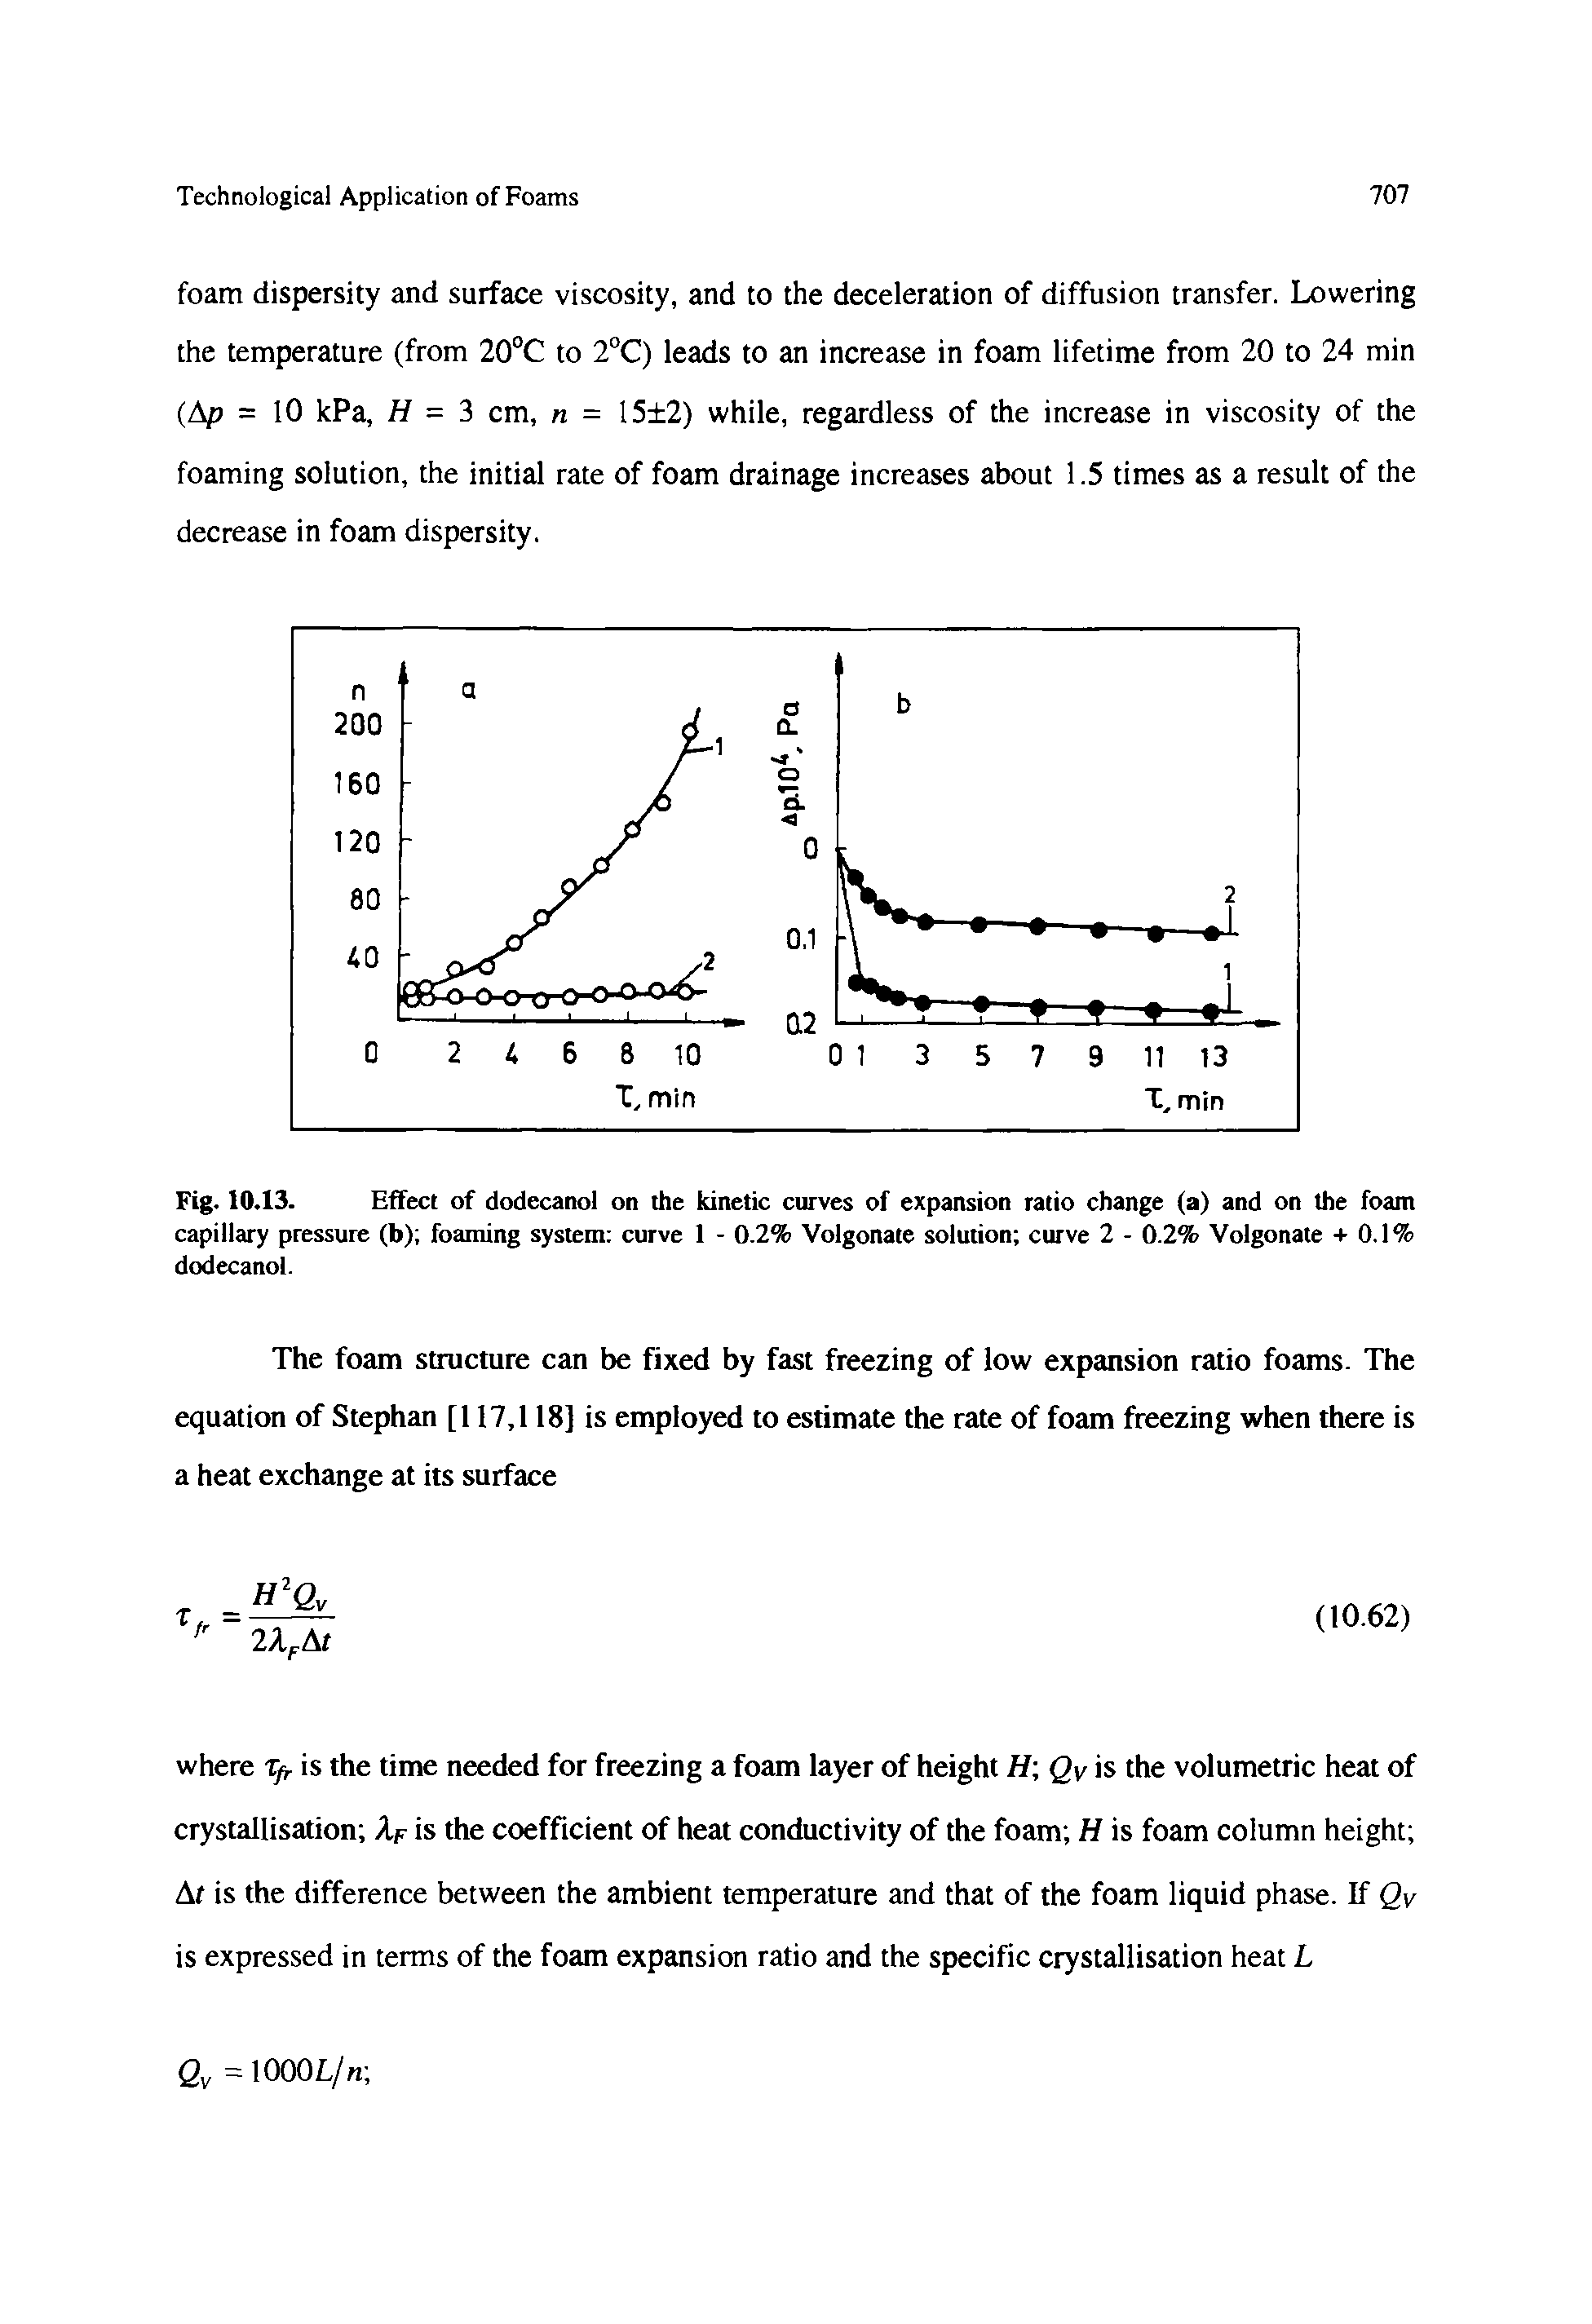 Fig. 10.13. Effect of dodecanol on the kinetic curves of expansion ratio change (a) and on the foam capillary pressure (b) foaming system curve 1 - 0.2% Volgonate solution curve 2 - 0.2% Volgonate + 0.1% dodecanol.